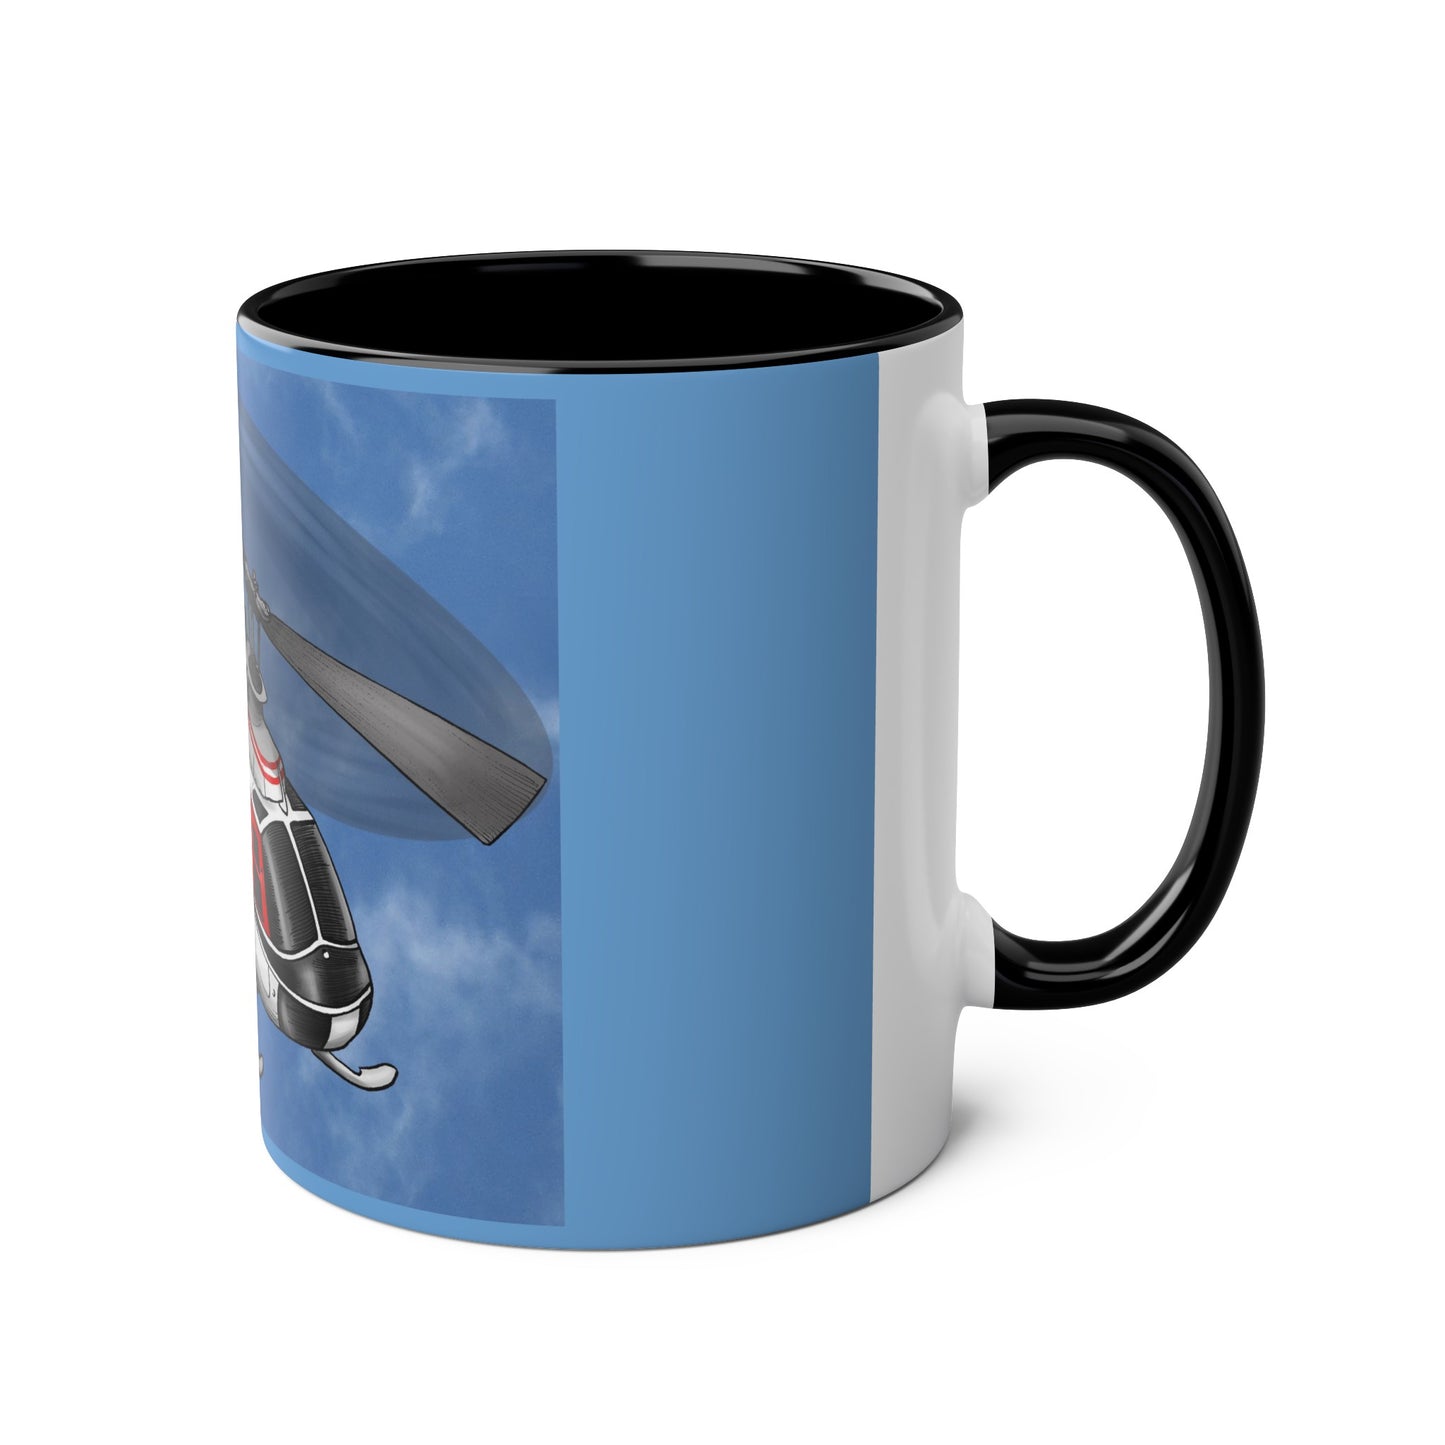 Bell Jet Ranger Helicopter Two-Tone Coffee Mugs, 11oz